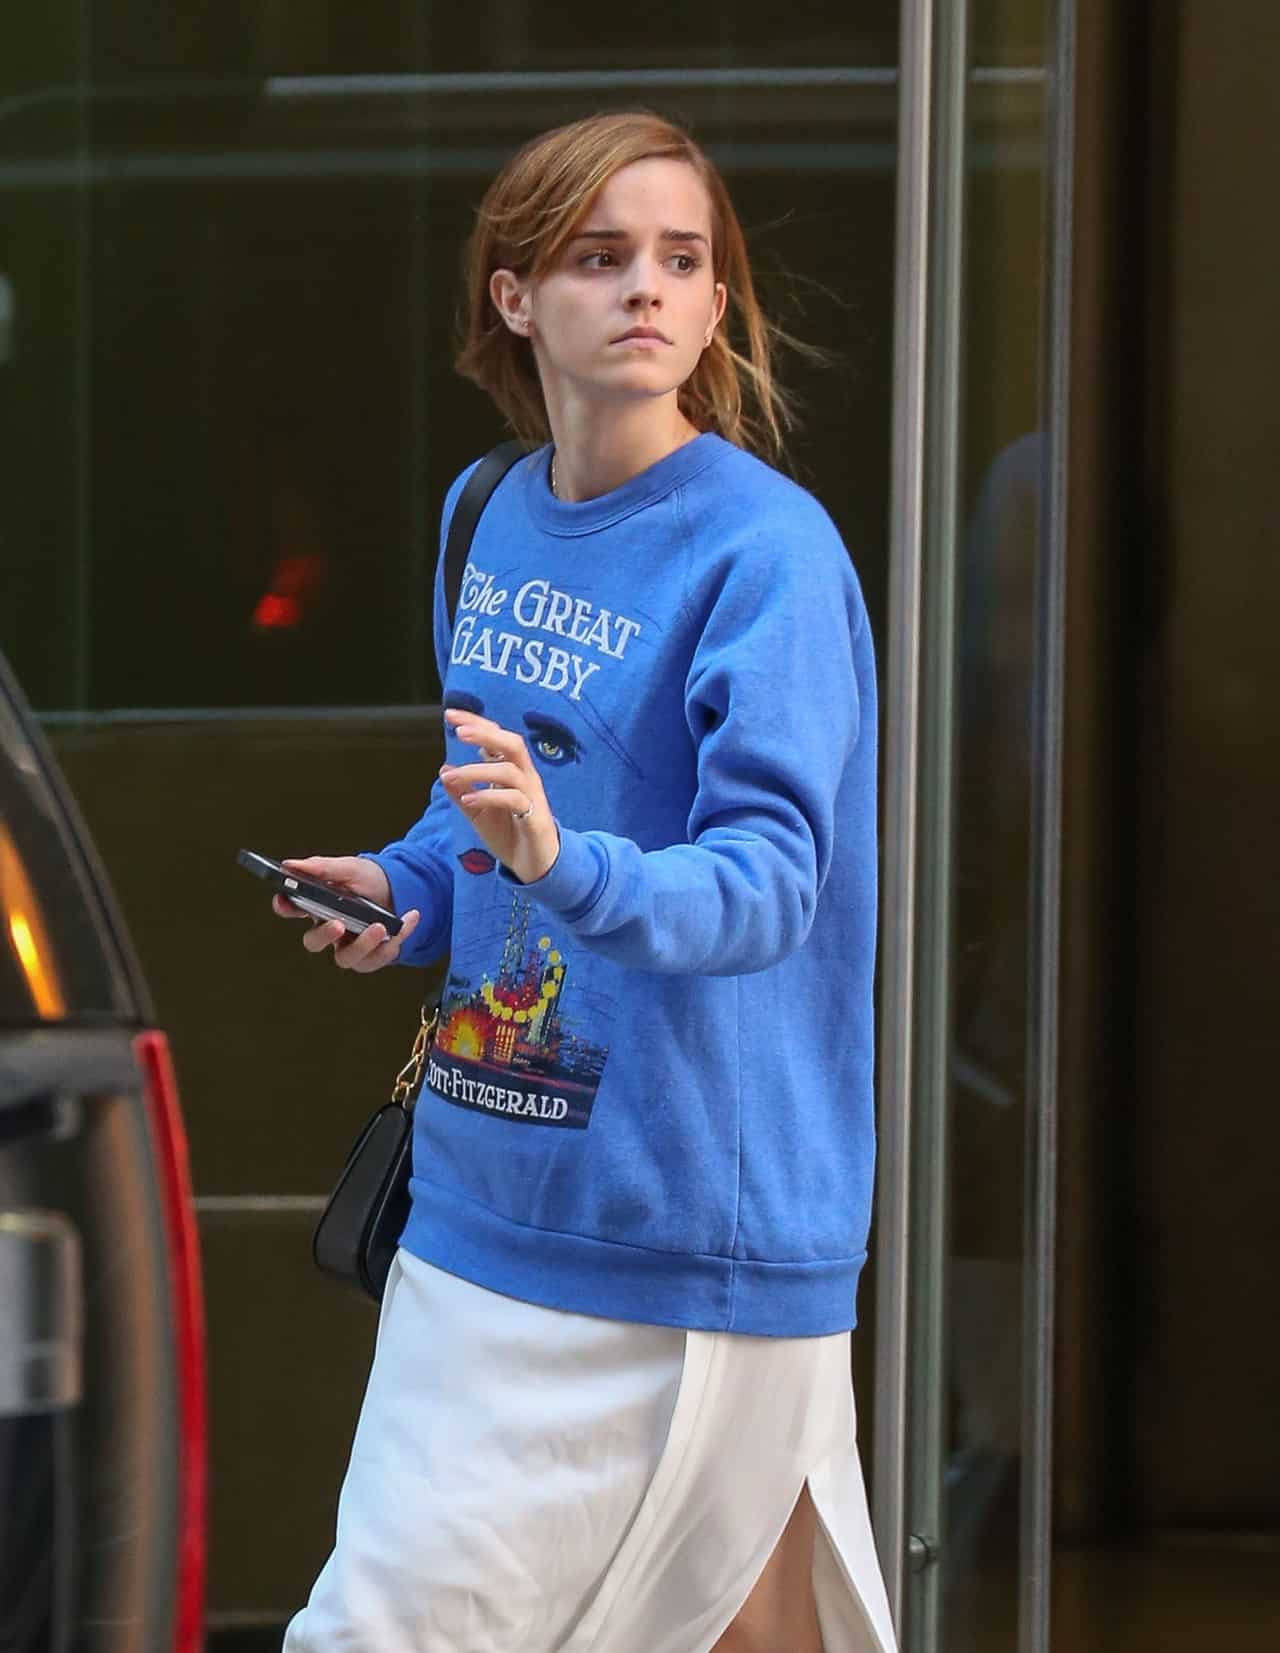 Emma Watson Stuns in Cream Dress and Vibrant Blue Sweater in New York City